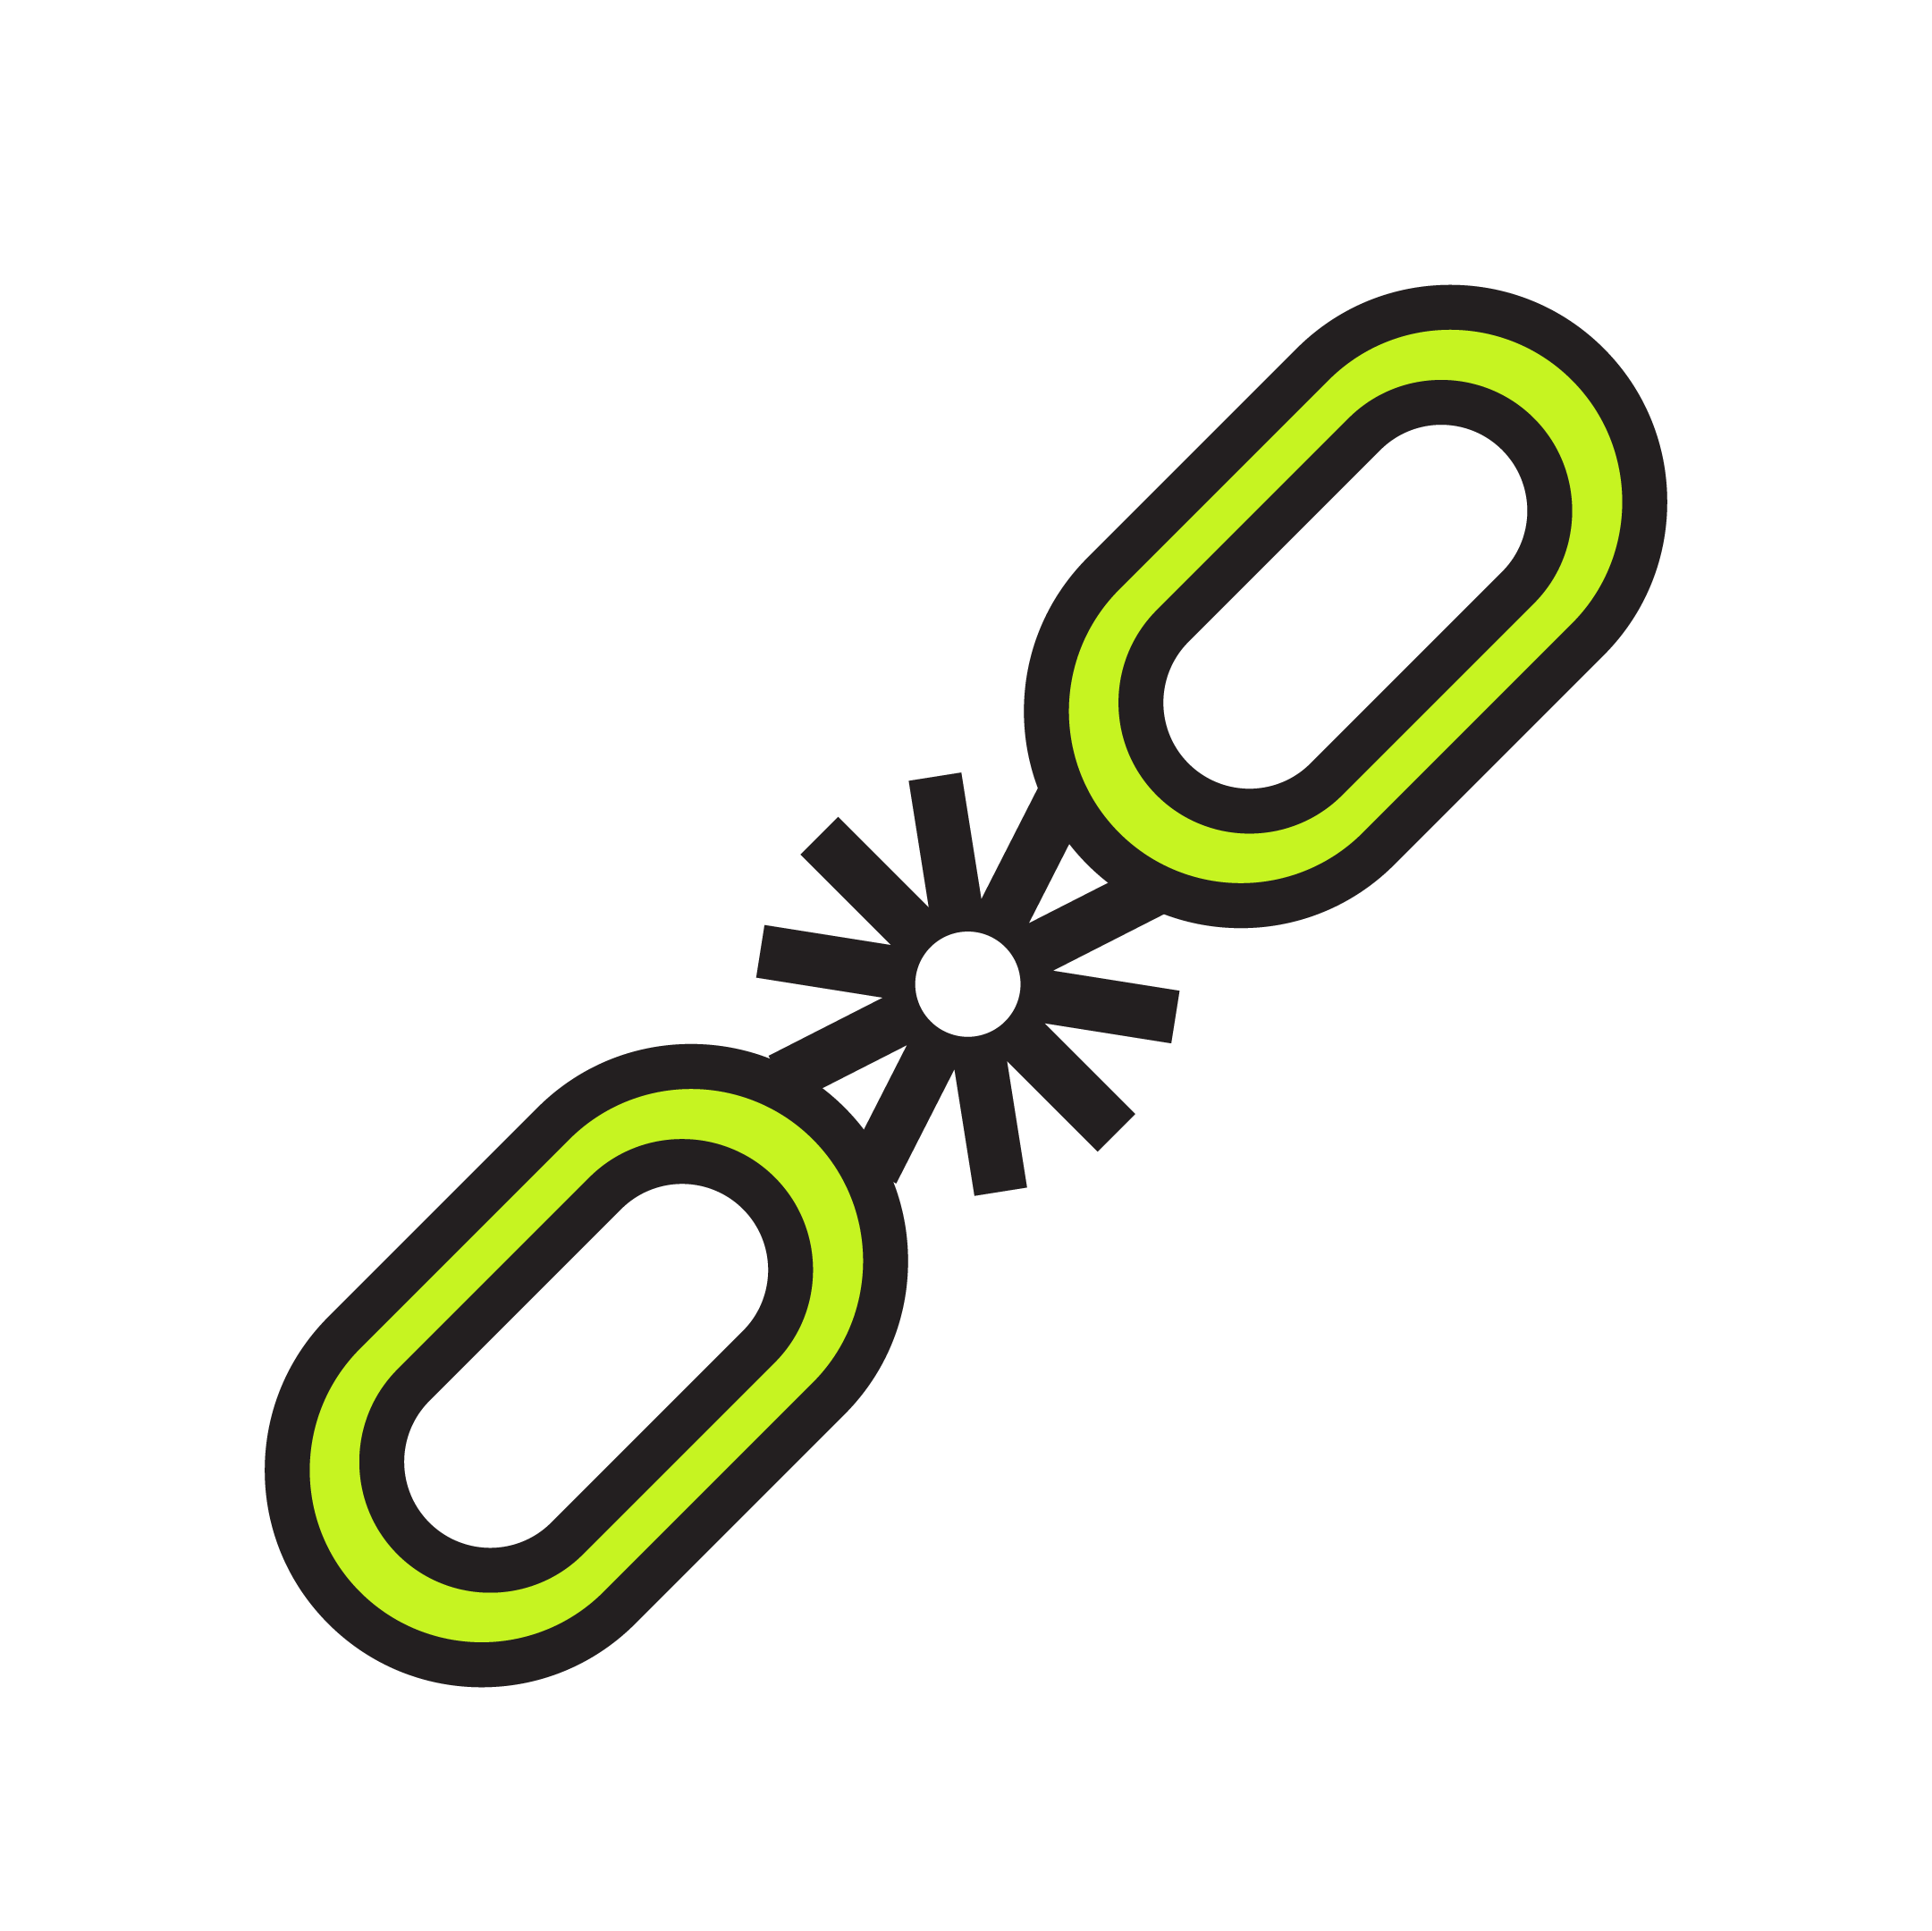 2 green chain links. They are connected by the GMCDP cog logo.